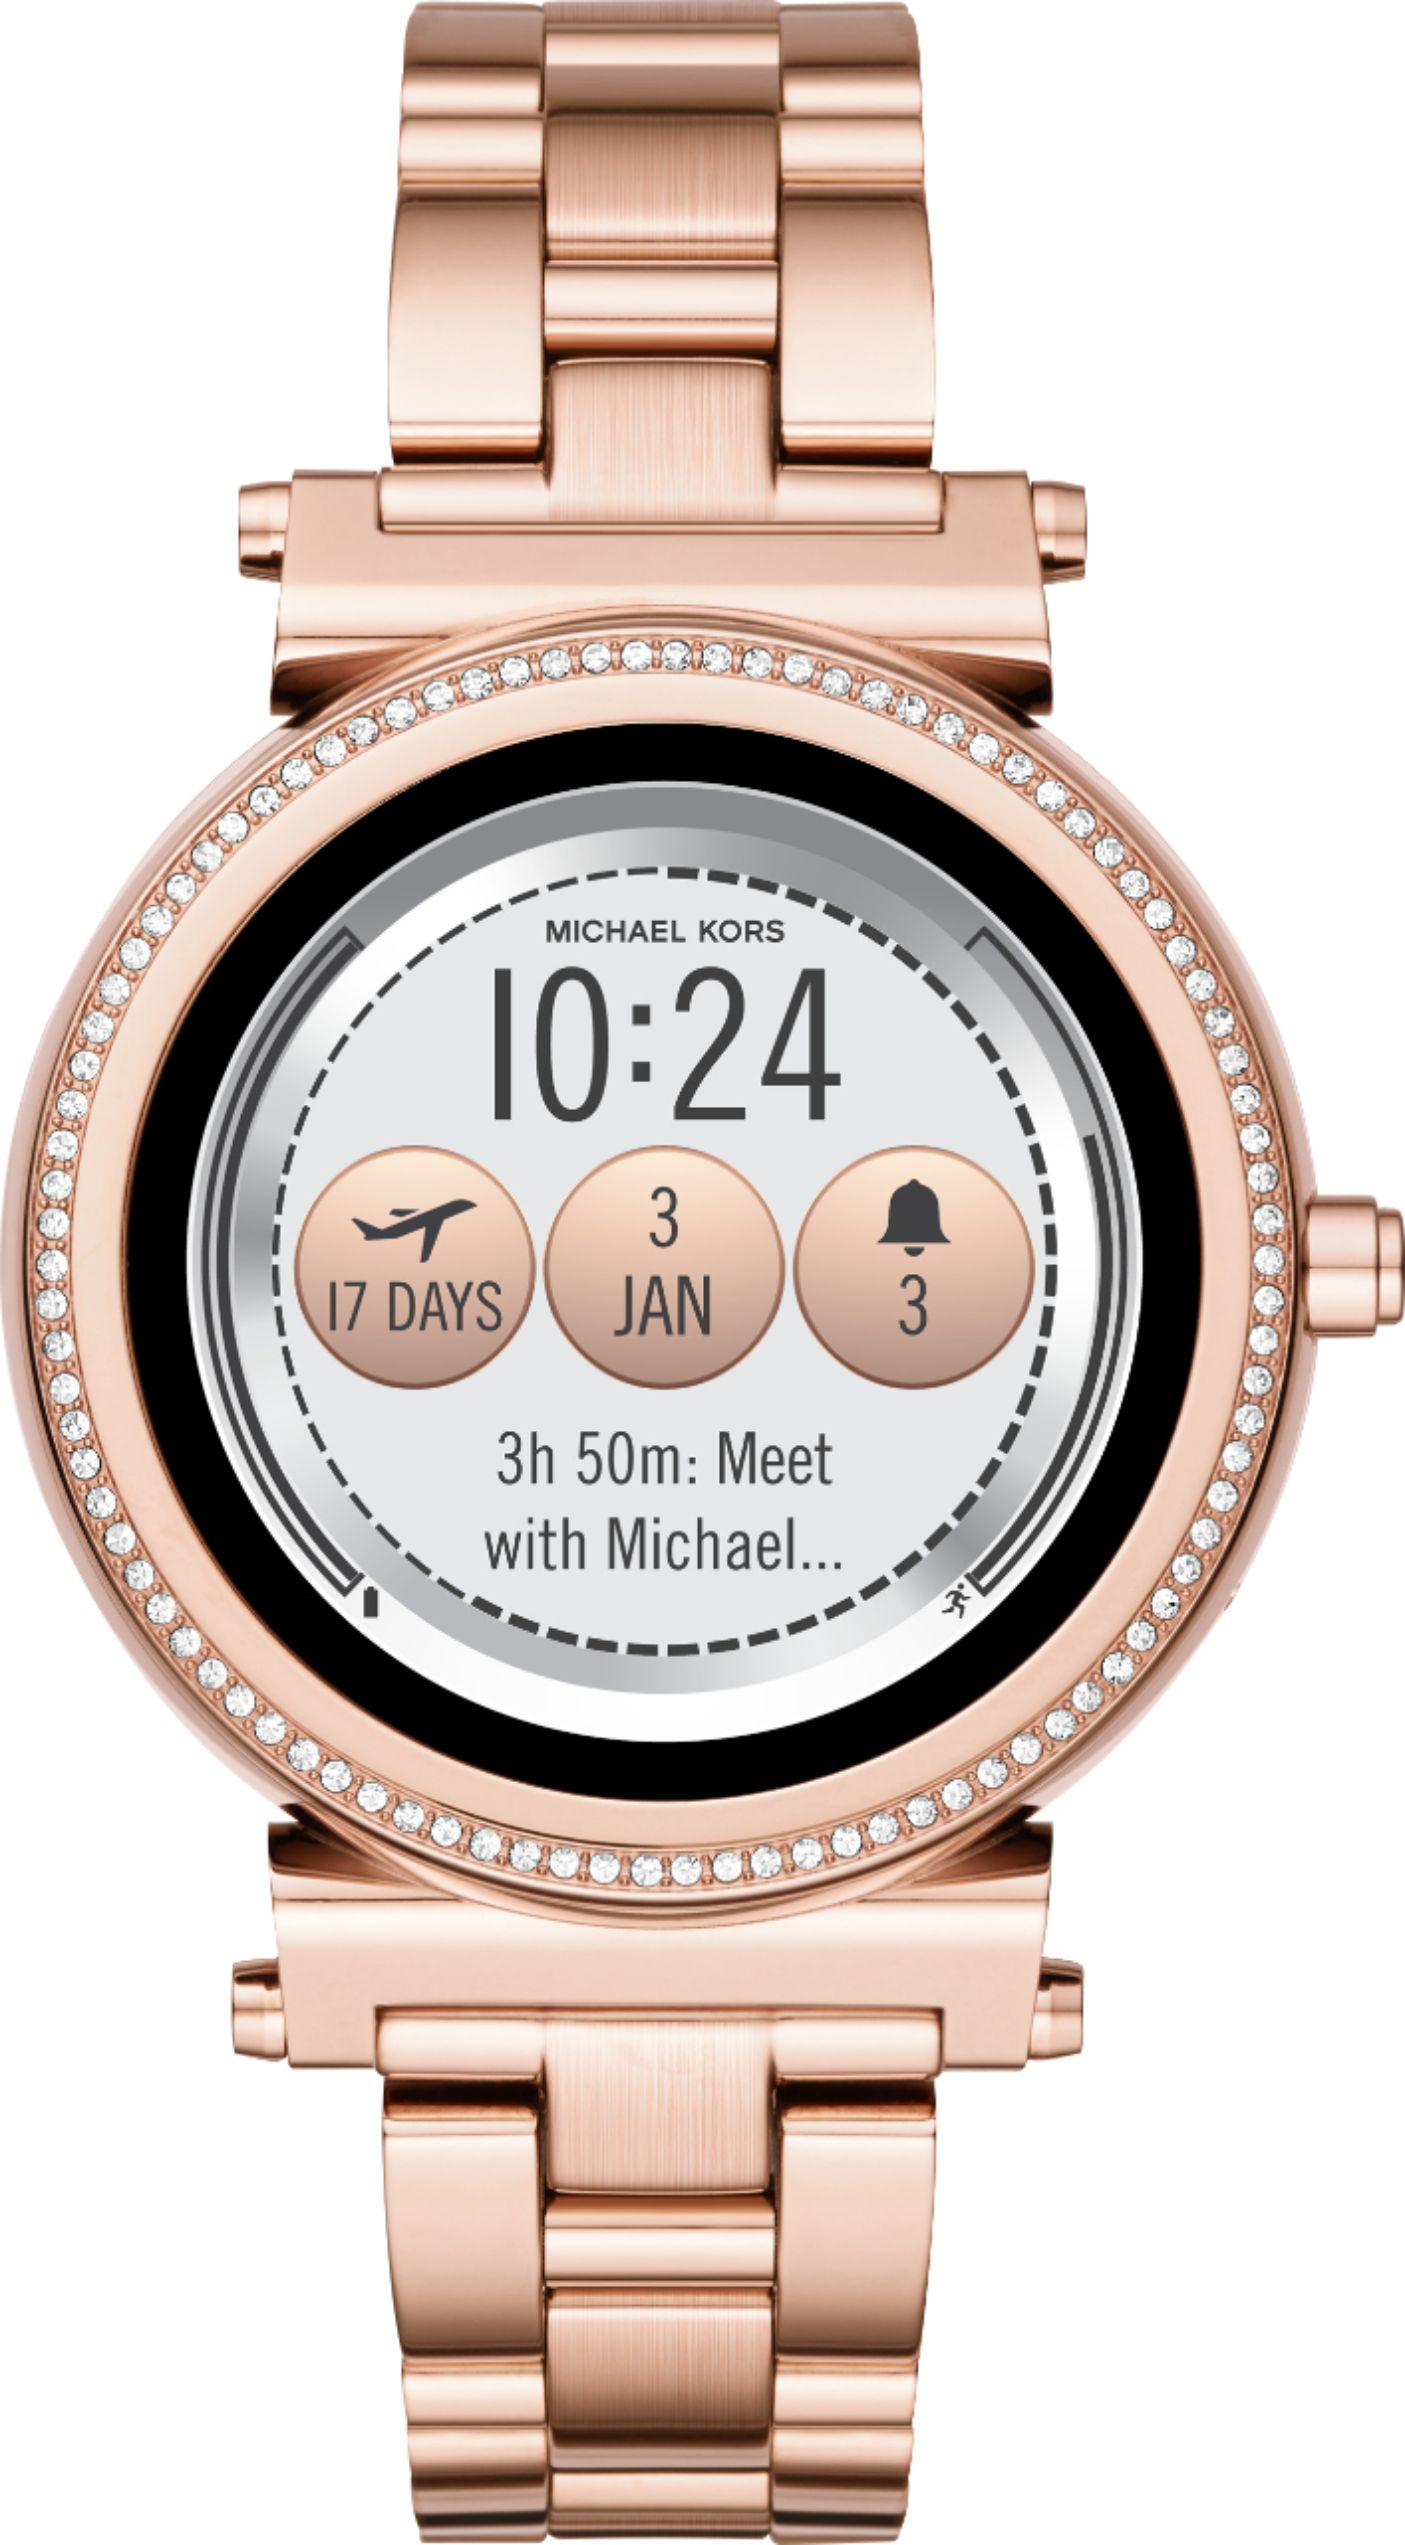 Michael Kors - Access Sofie Smartwatch 42mm Stainless Steel - Rose Gold Tone